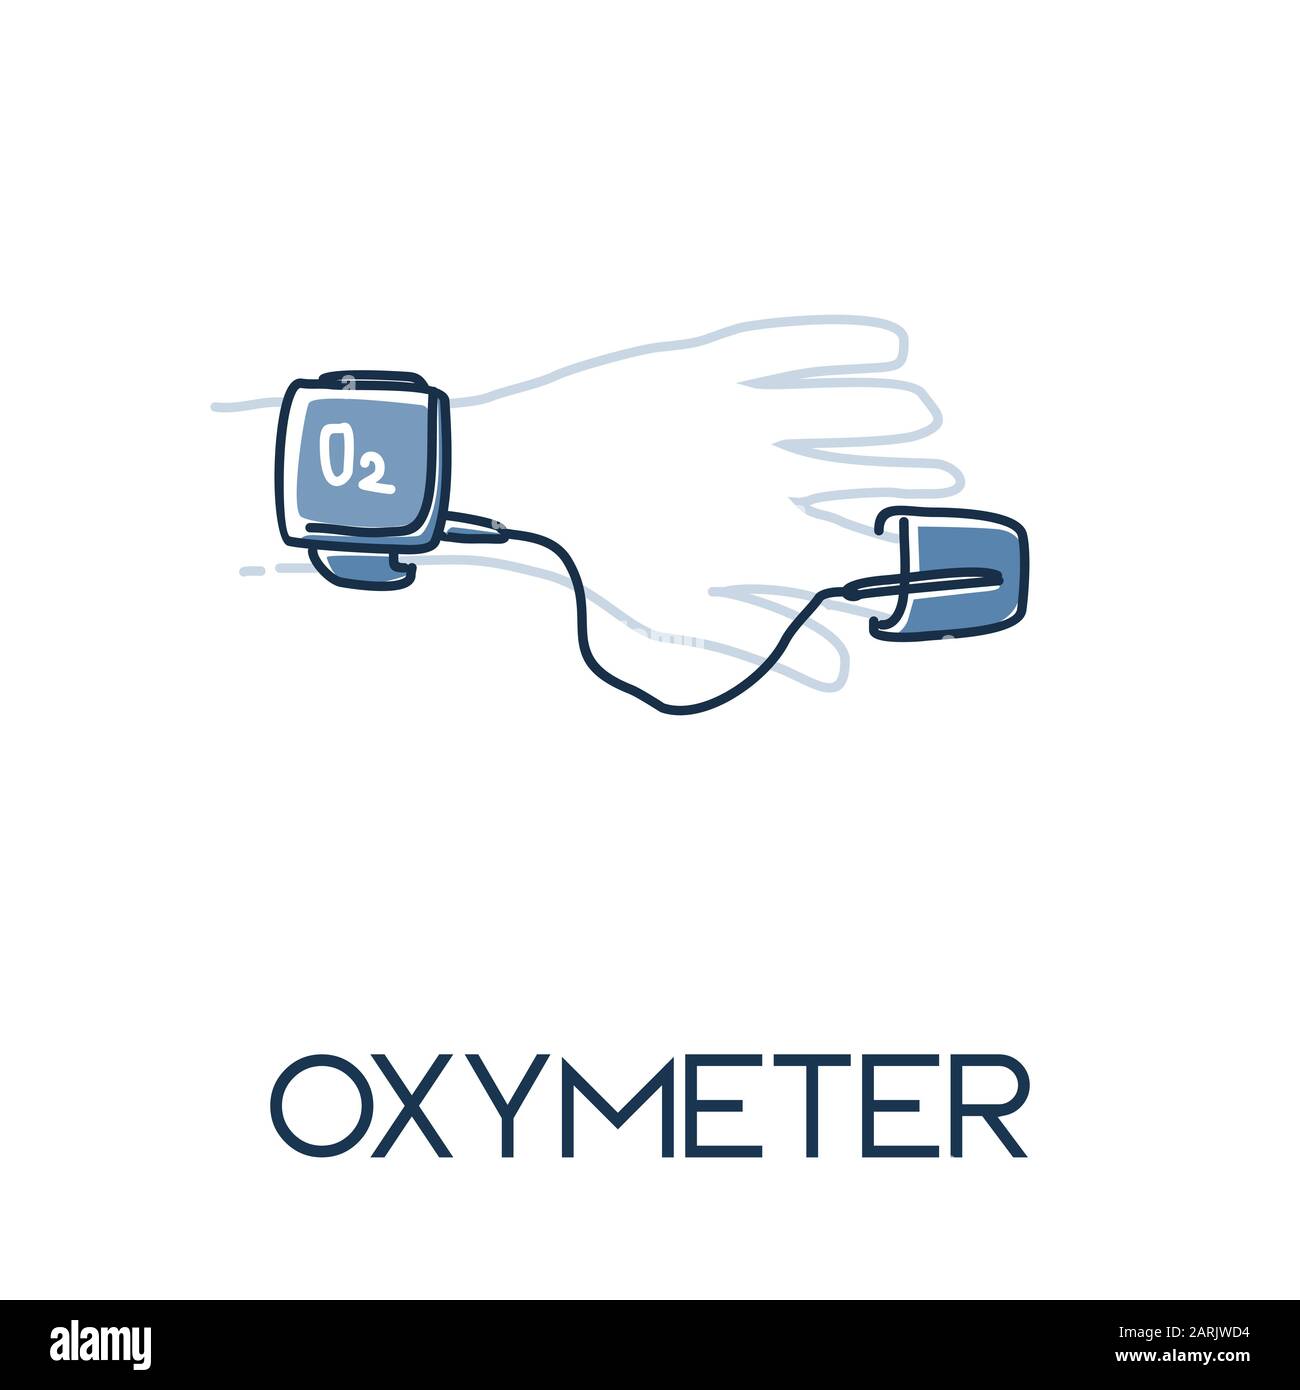 Pulse Oxymeter minimalist out line hand drawn medic flat icon illustration Stock Vector